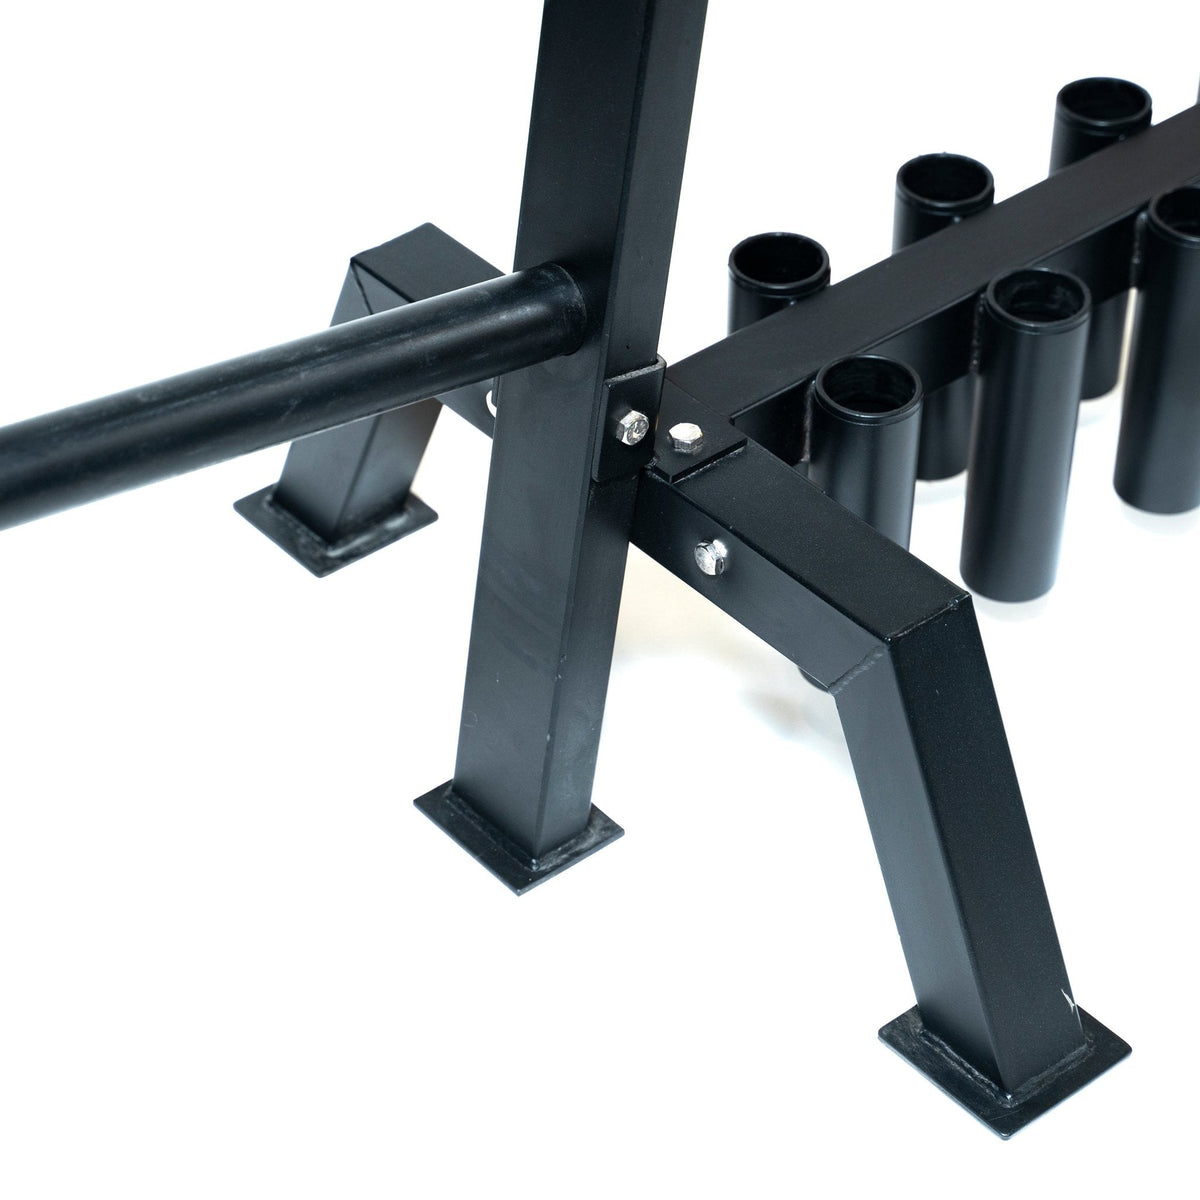 FitWay Equip. FitWay Weight Storage System - Fitness Experience